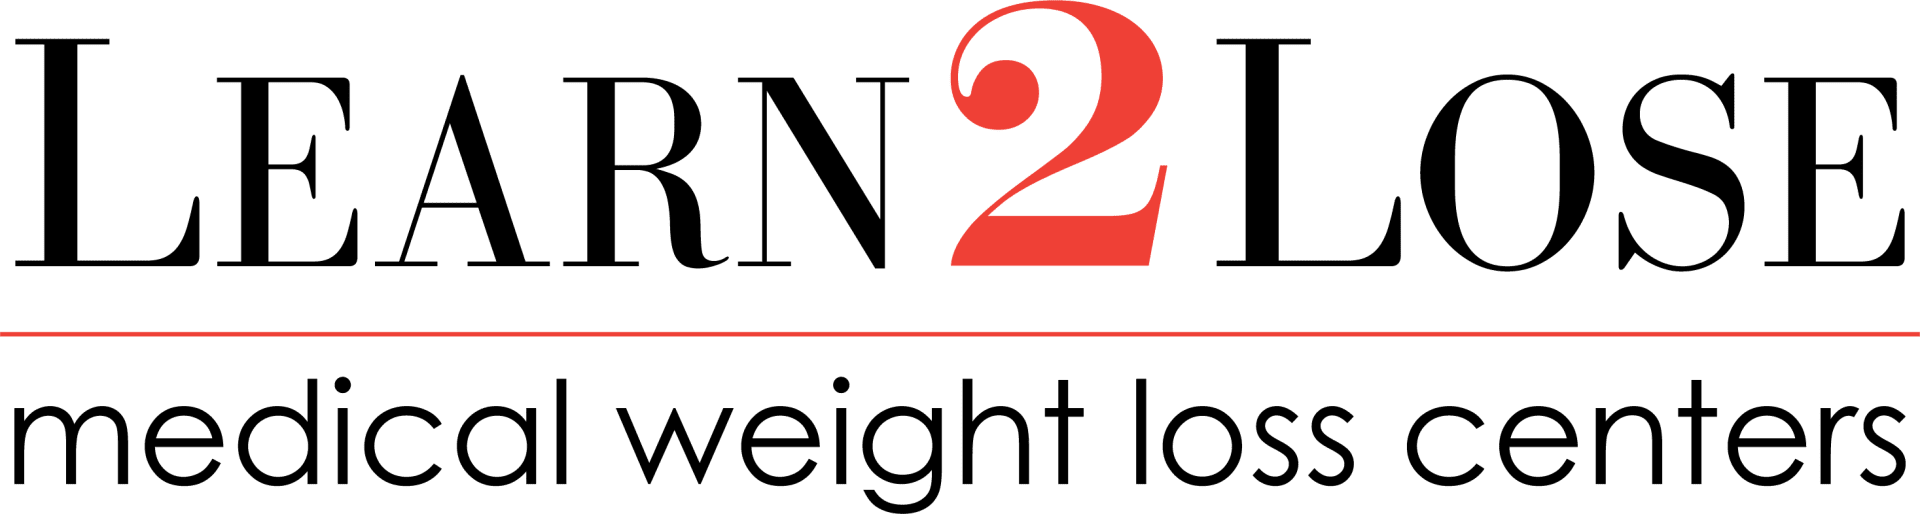 Online Medical Weight Loss Clinic